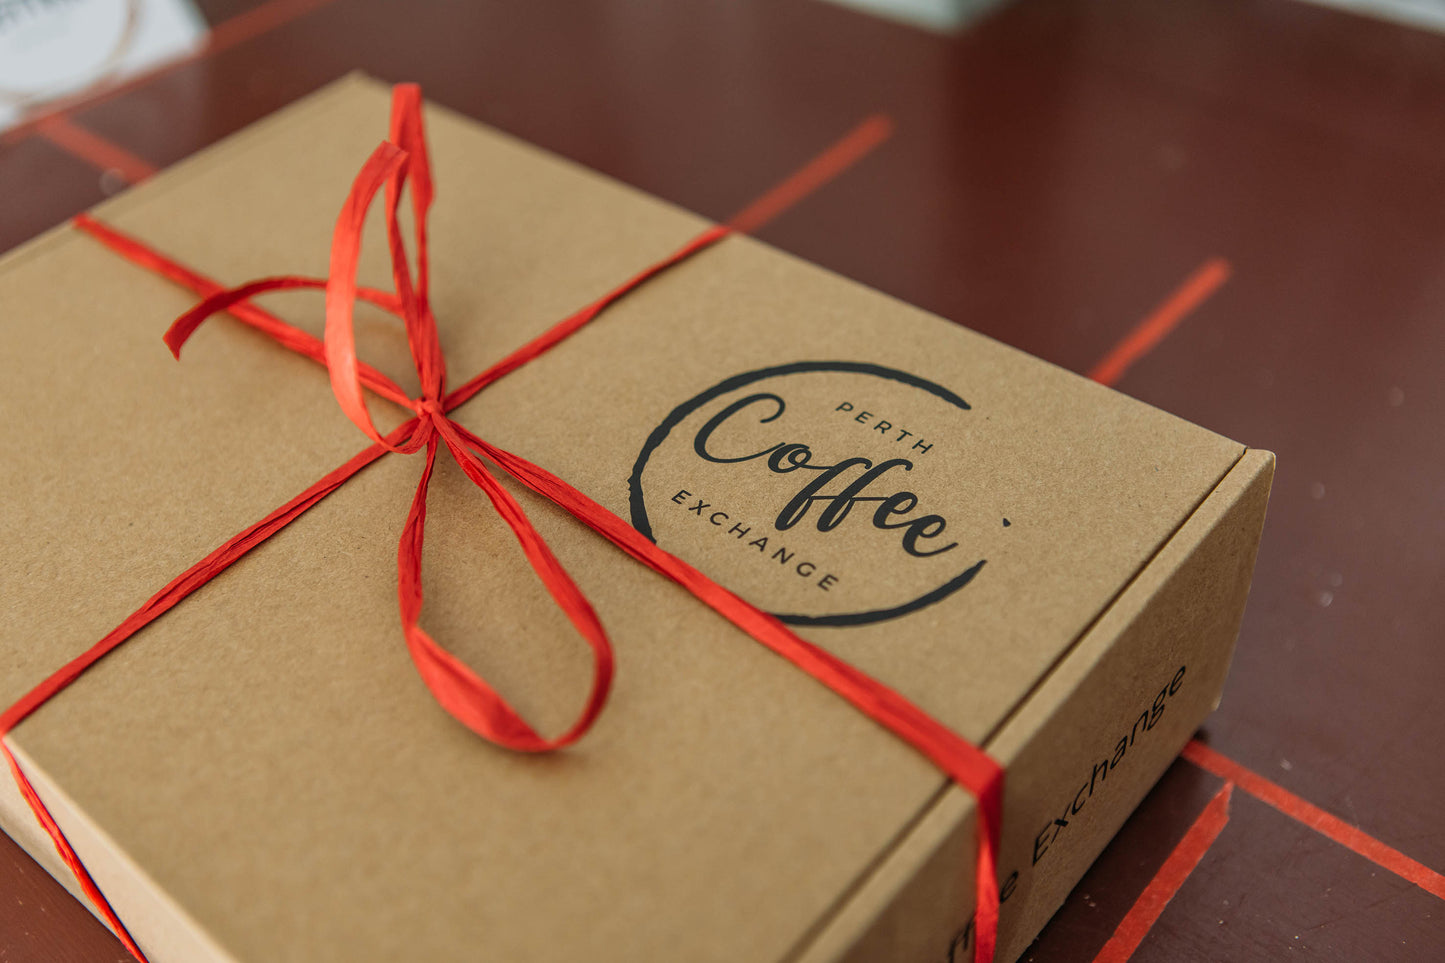 Perth gift-wrapped cardboard box with a red ribbon, labeled "Perth Coffee Exchange" in stylish black lettering, sits on a wooden table with red grains.